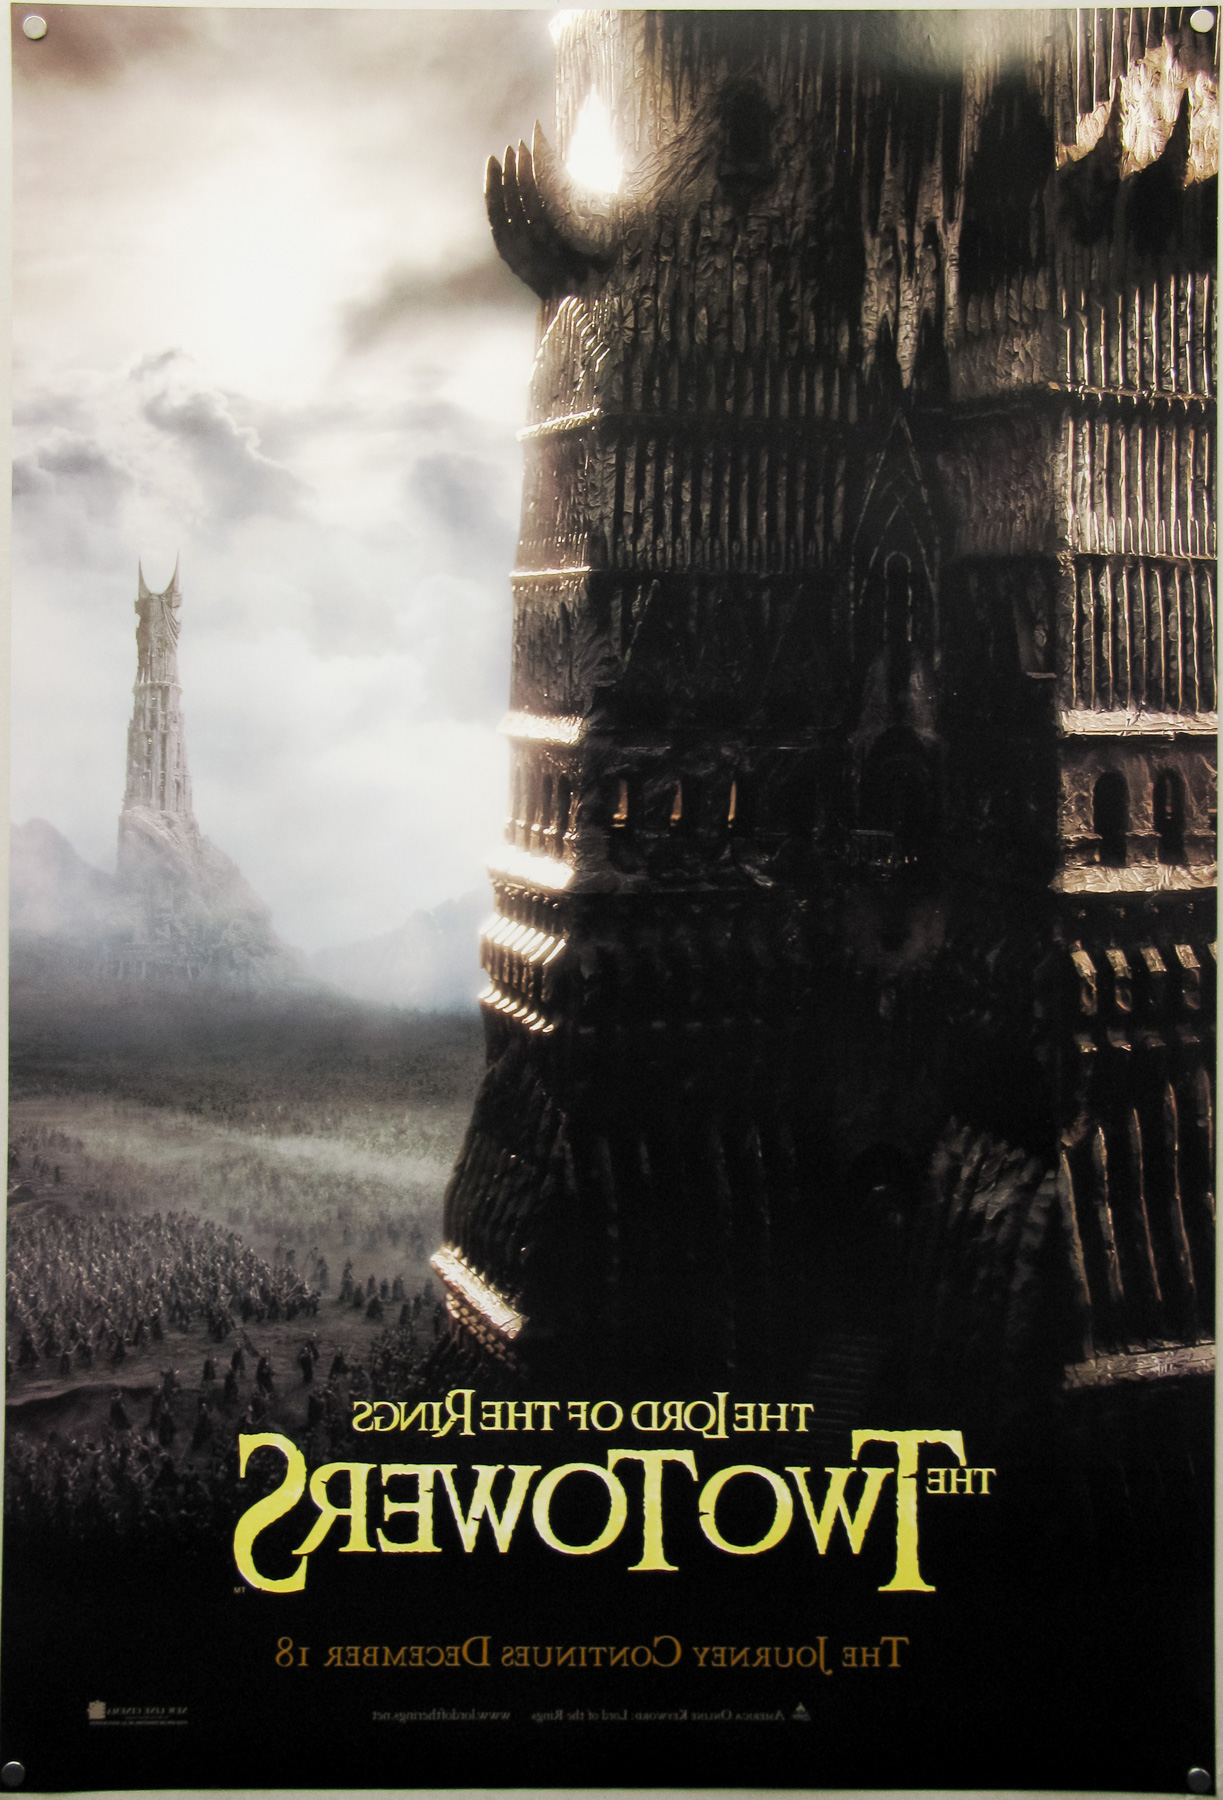 The Lord of the Rings: The Two Towers Movie Poster 2002 1 Sheet